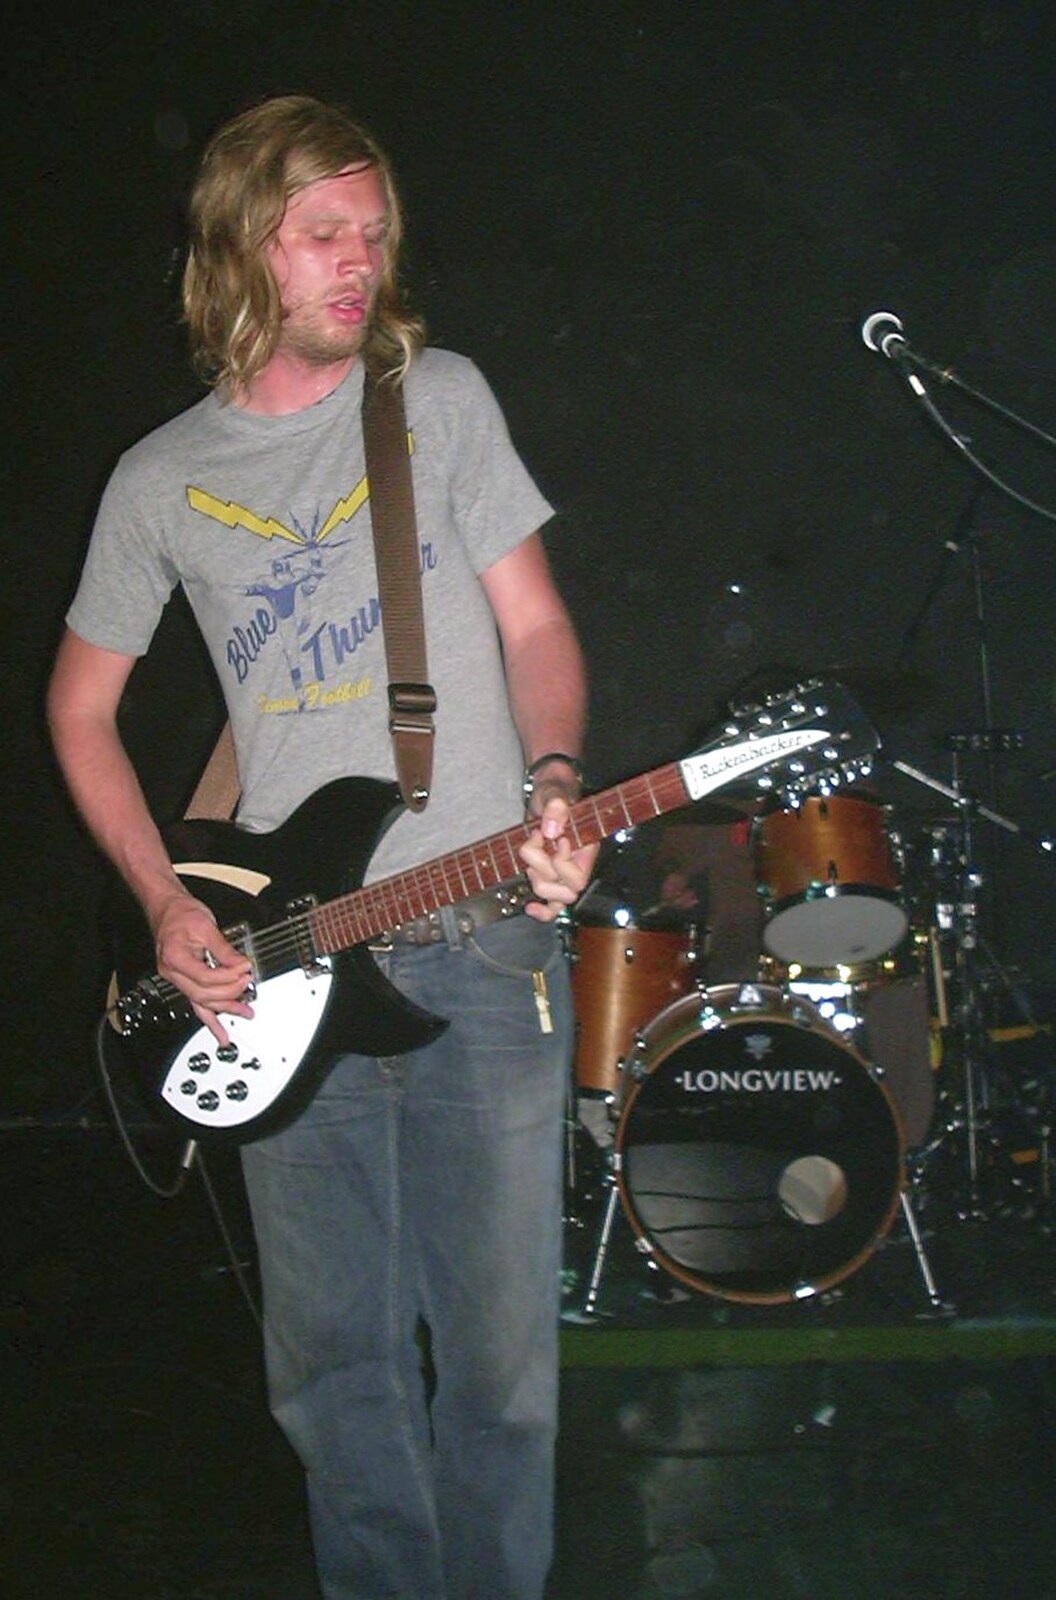 Longview and The BBs, Norwich and Banham, Norfolk - 4th July 2003: Rob McVey of Longview on a Rickenbacker guitar